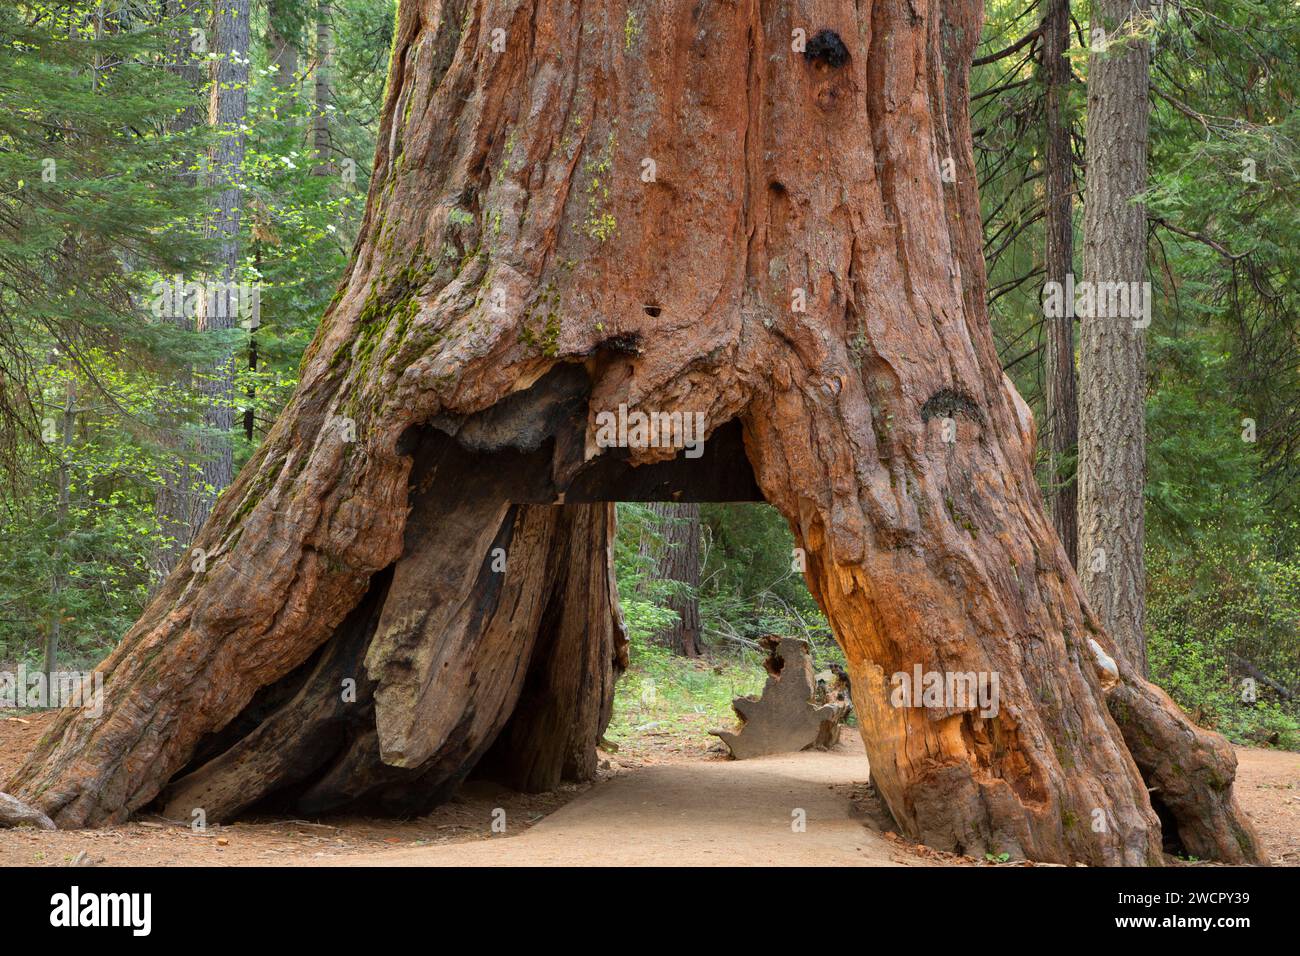 Pioneer Cabin Tree, Calaveras Big Trees State Park, Ebbetts Pass National Scenic Byway, Californie Banque D'Images